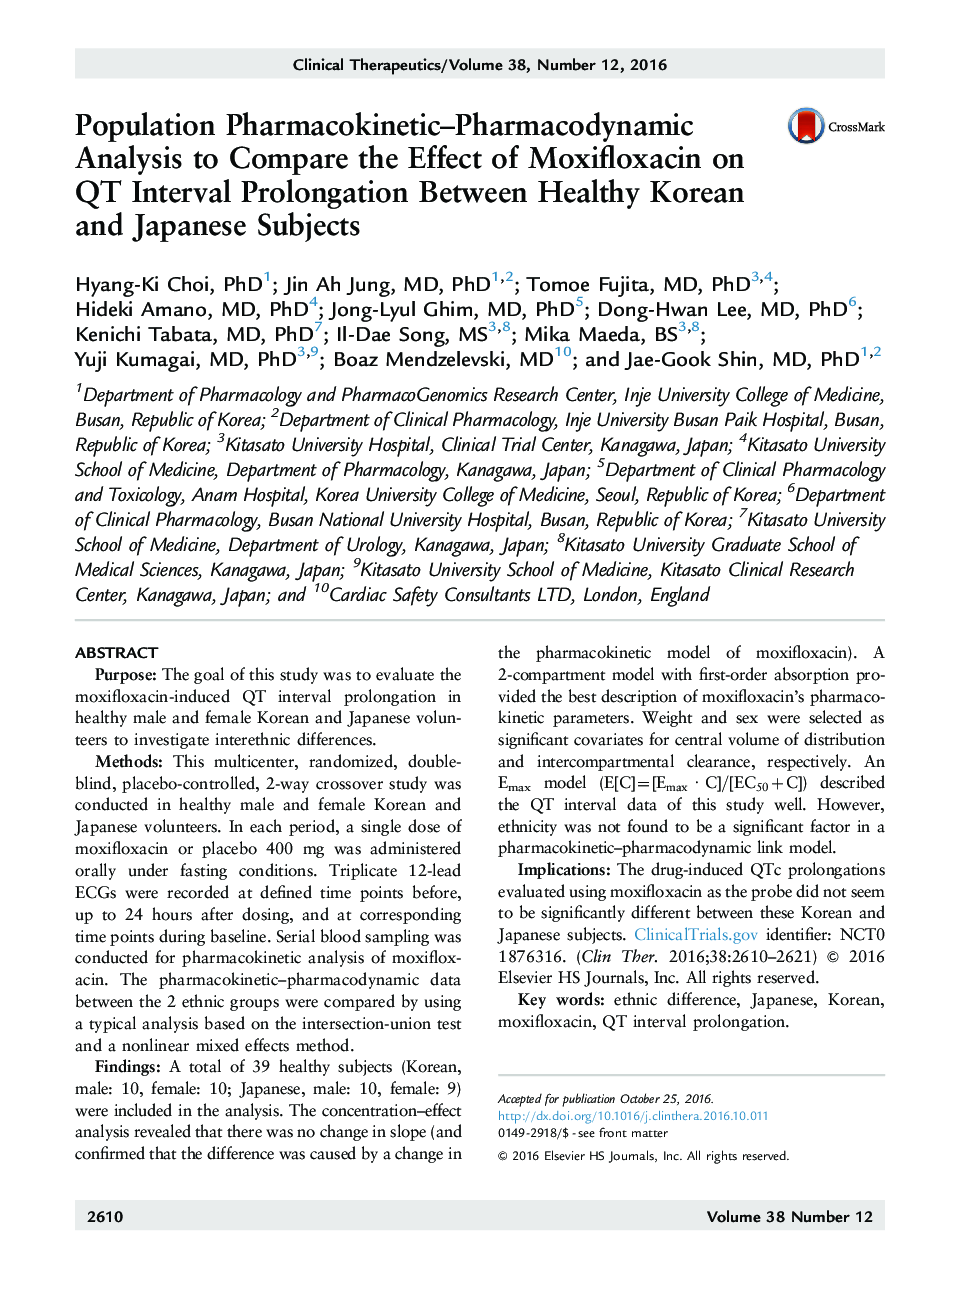 Population Pharmacokinetic-Pharmacodynamic Analysis to Compare the Effect of Moxifloxacin on QT Interval Prolongation Between Healthy Korean and Japanese Subjects